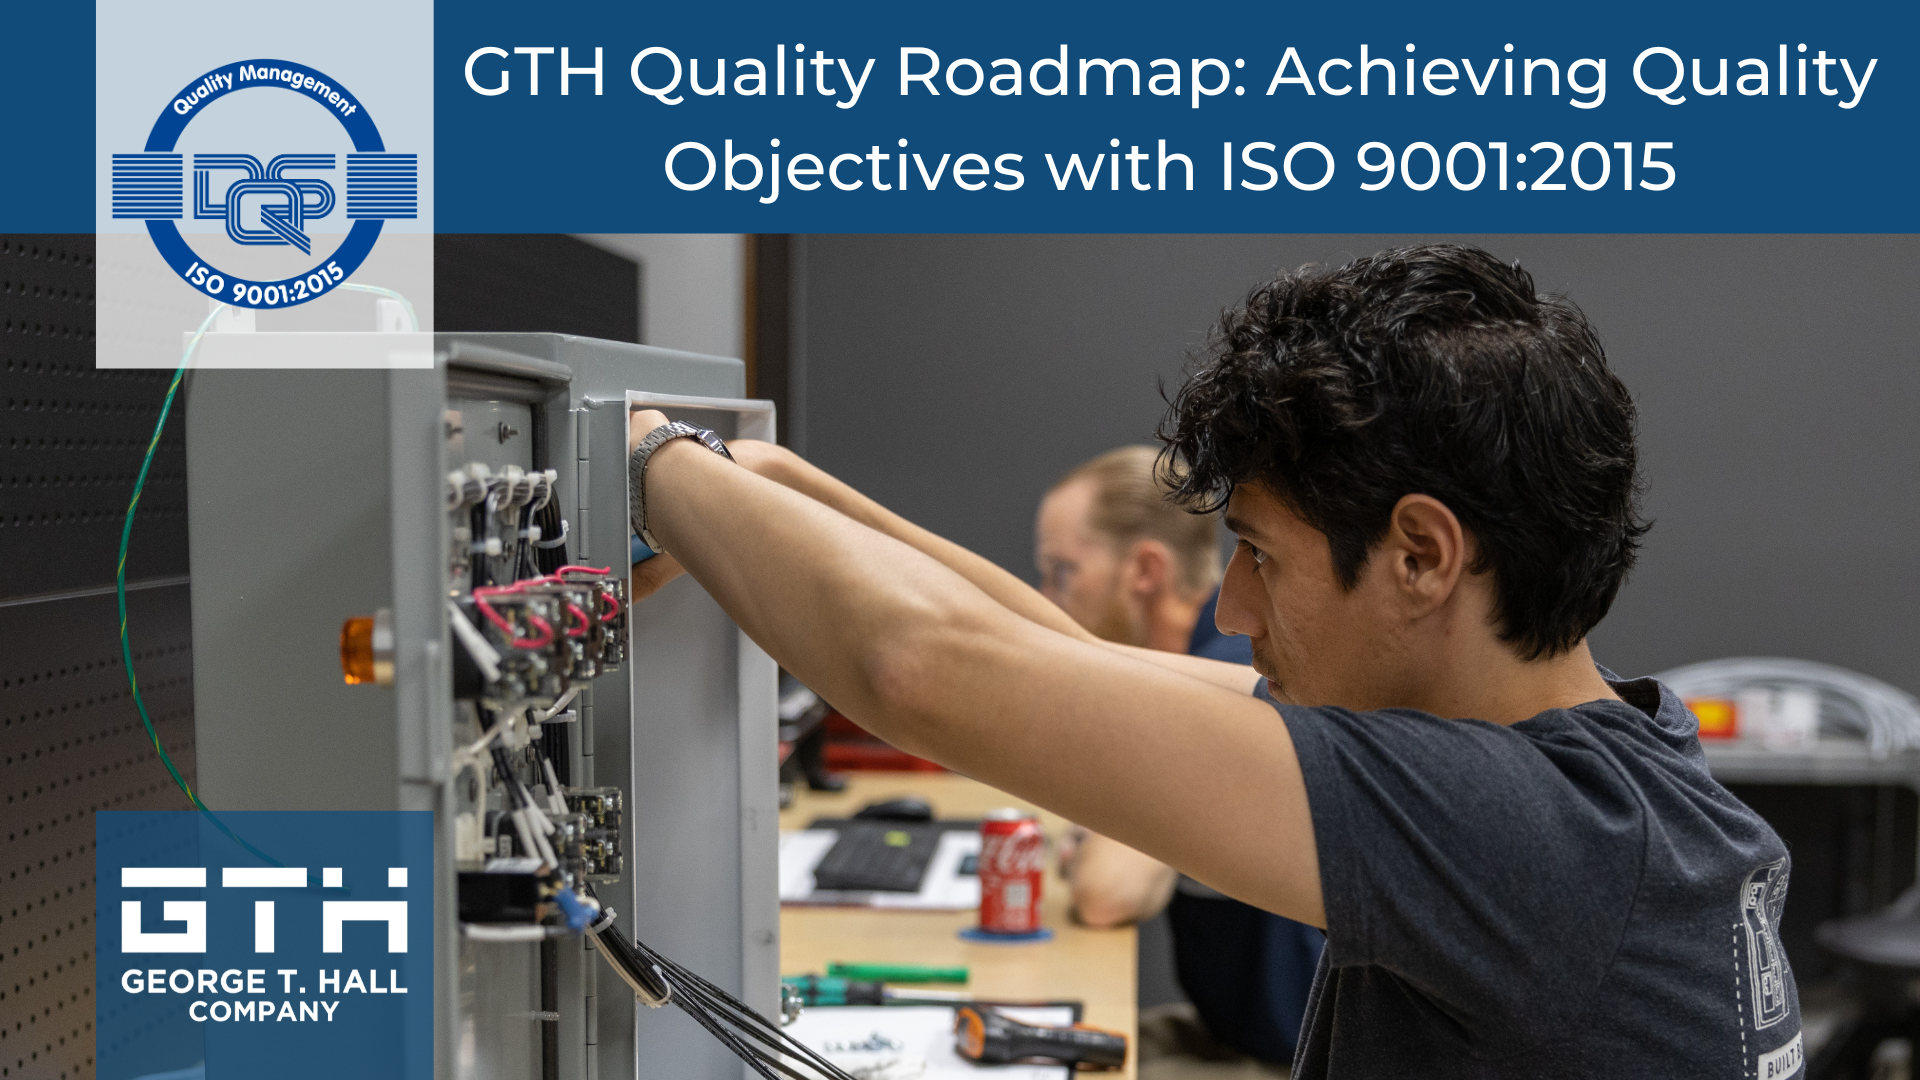 GTH Quality Roadmap: Achieving Quality Objectives with ISO 9001:2015